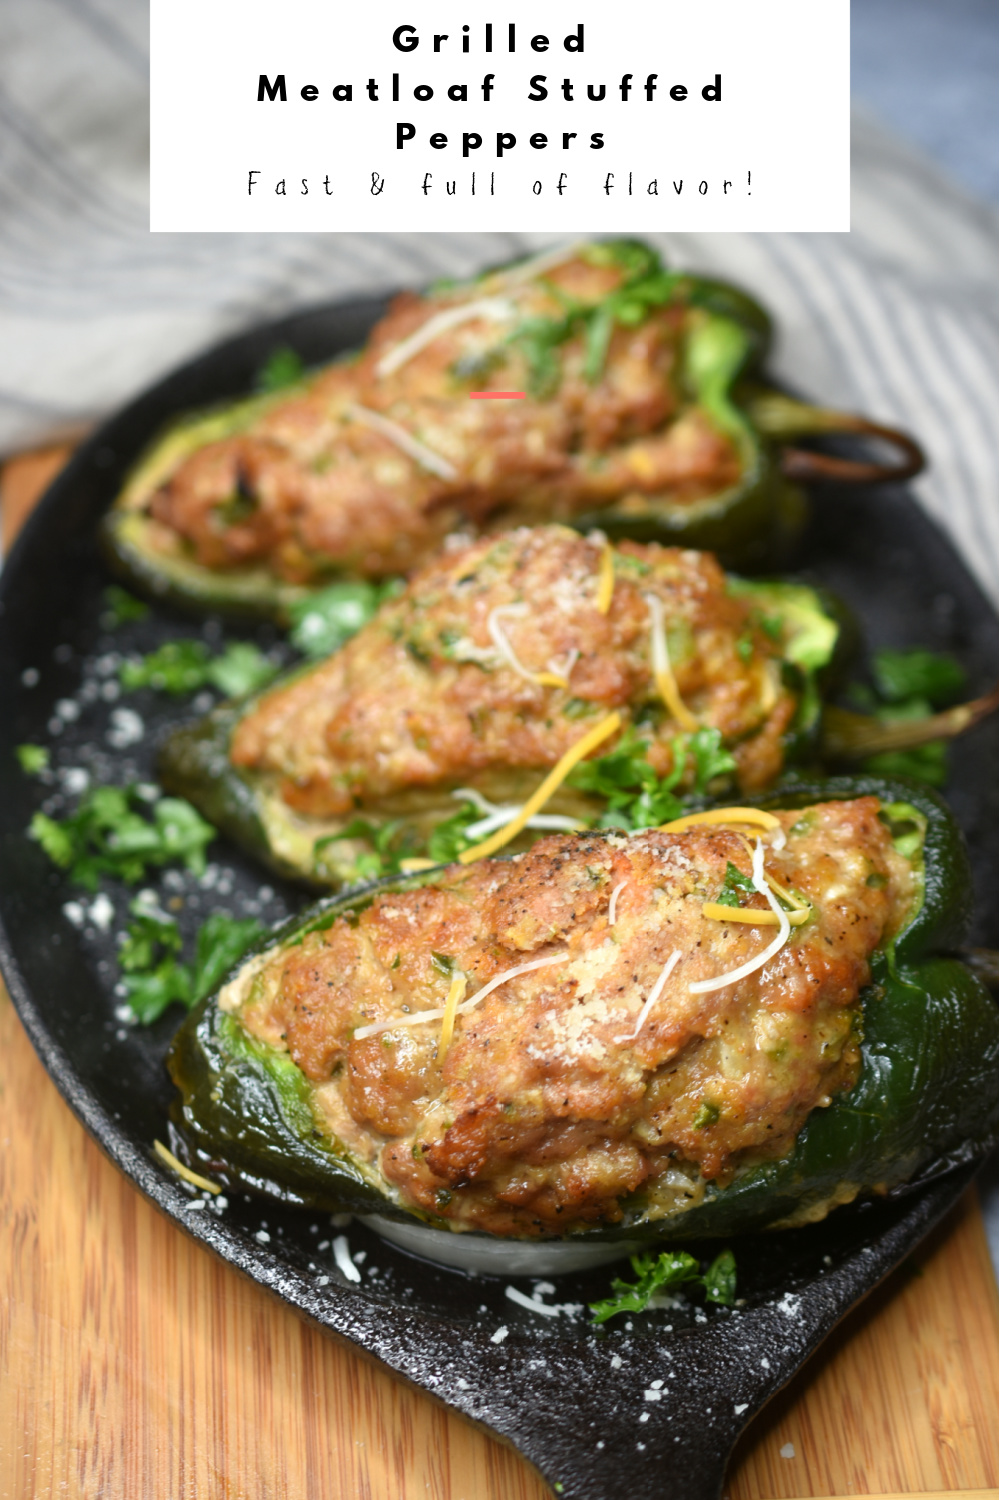 Pinterest image of three cooked Grilled Meatloaf Stuffed Peppers on a cast iron skillet